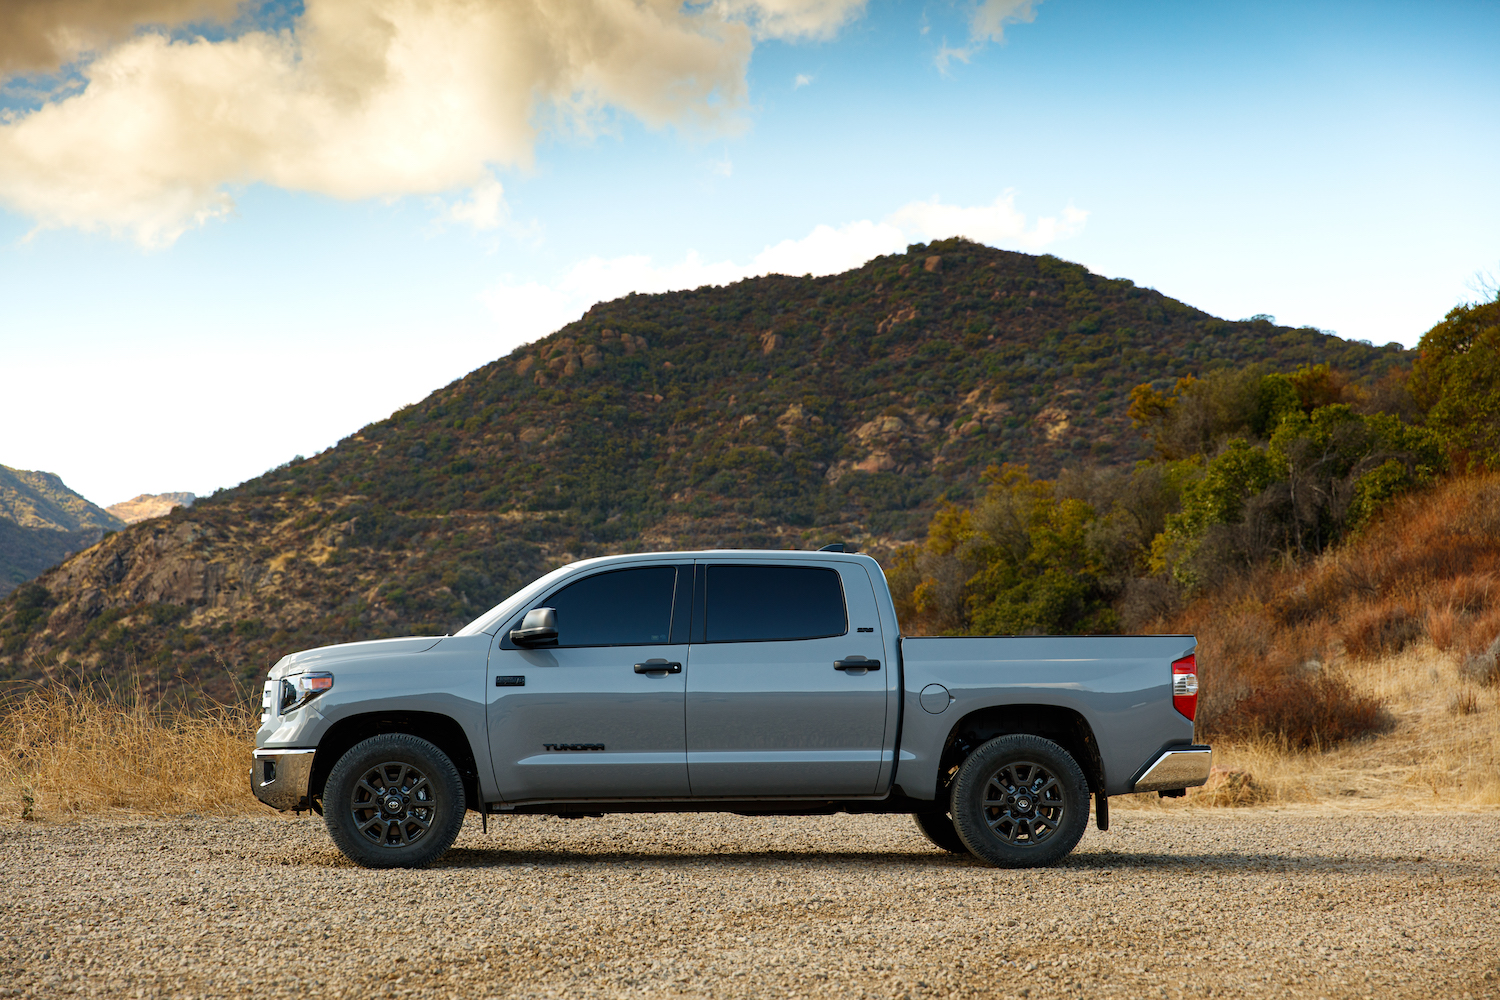 A silver 2021 Toyota Tundra parked in the wilderness, the Toyota Tundra is one of the cheapest trucks to maintain